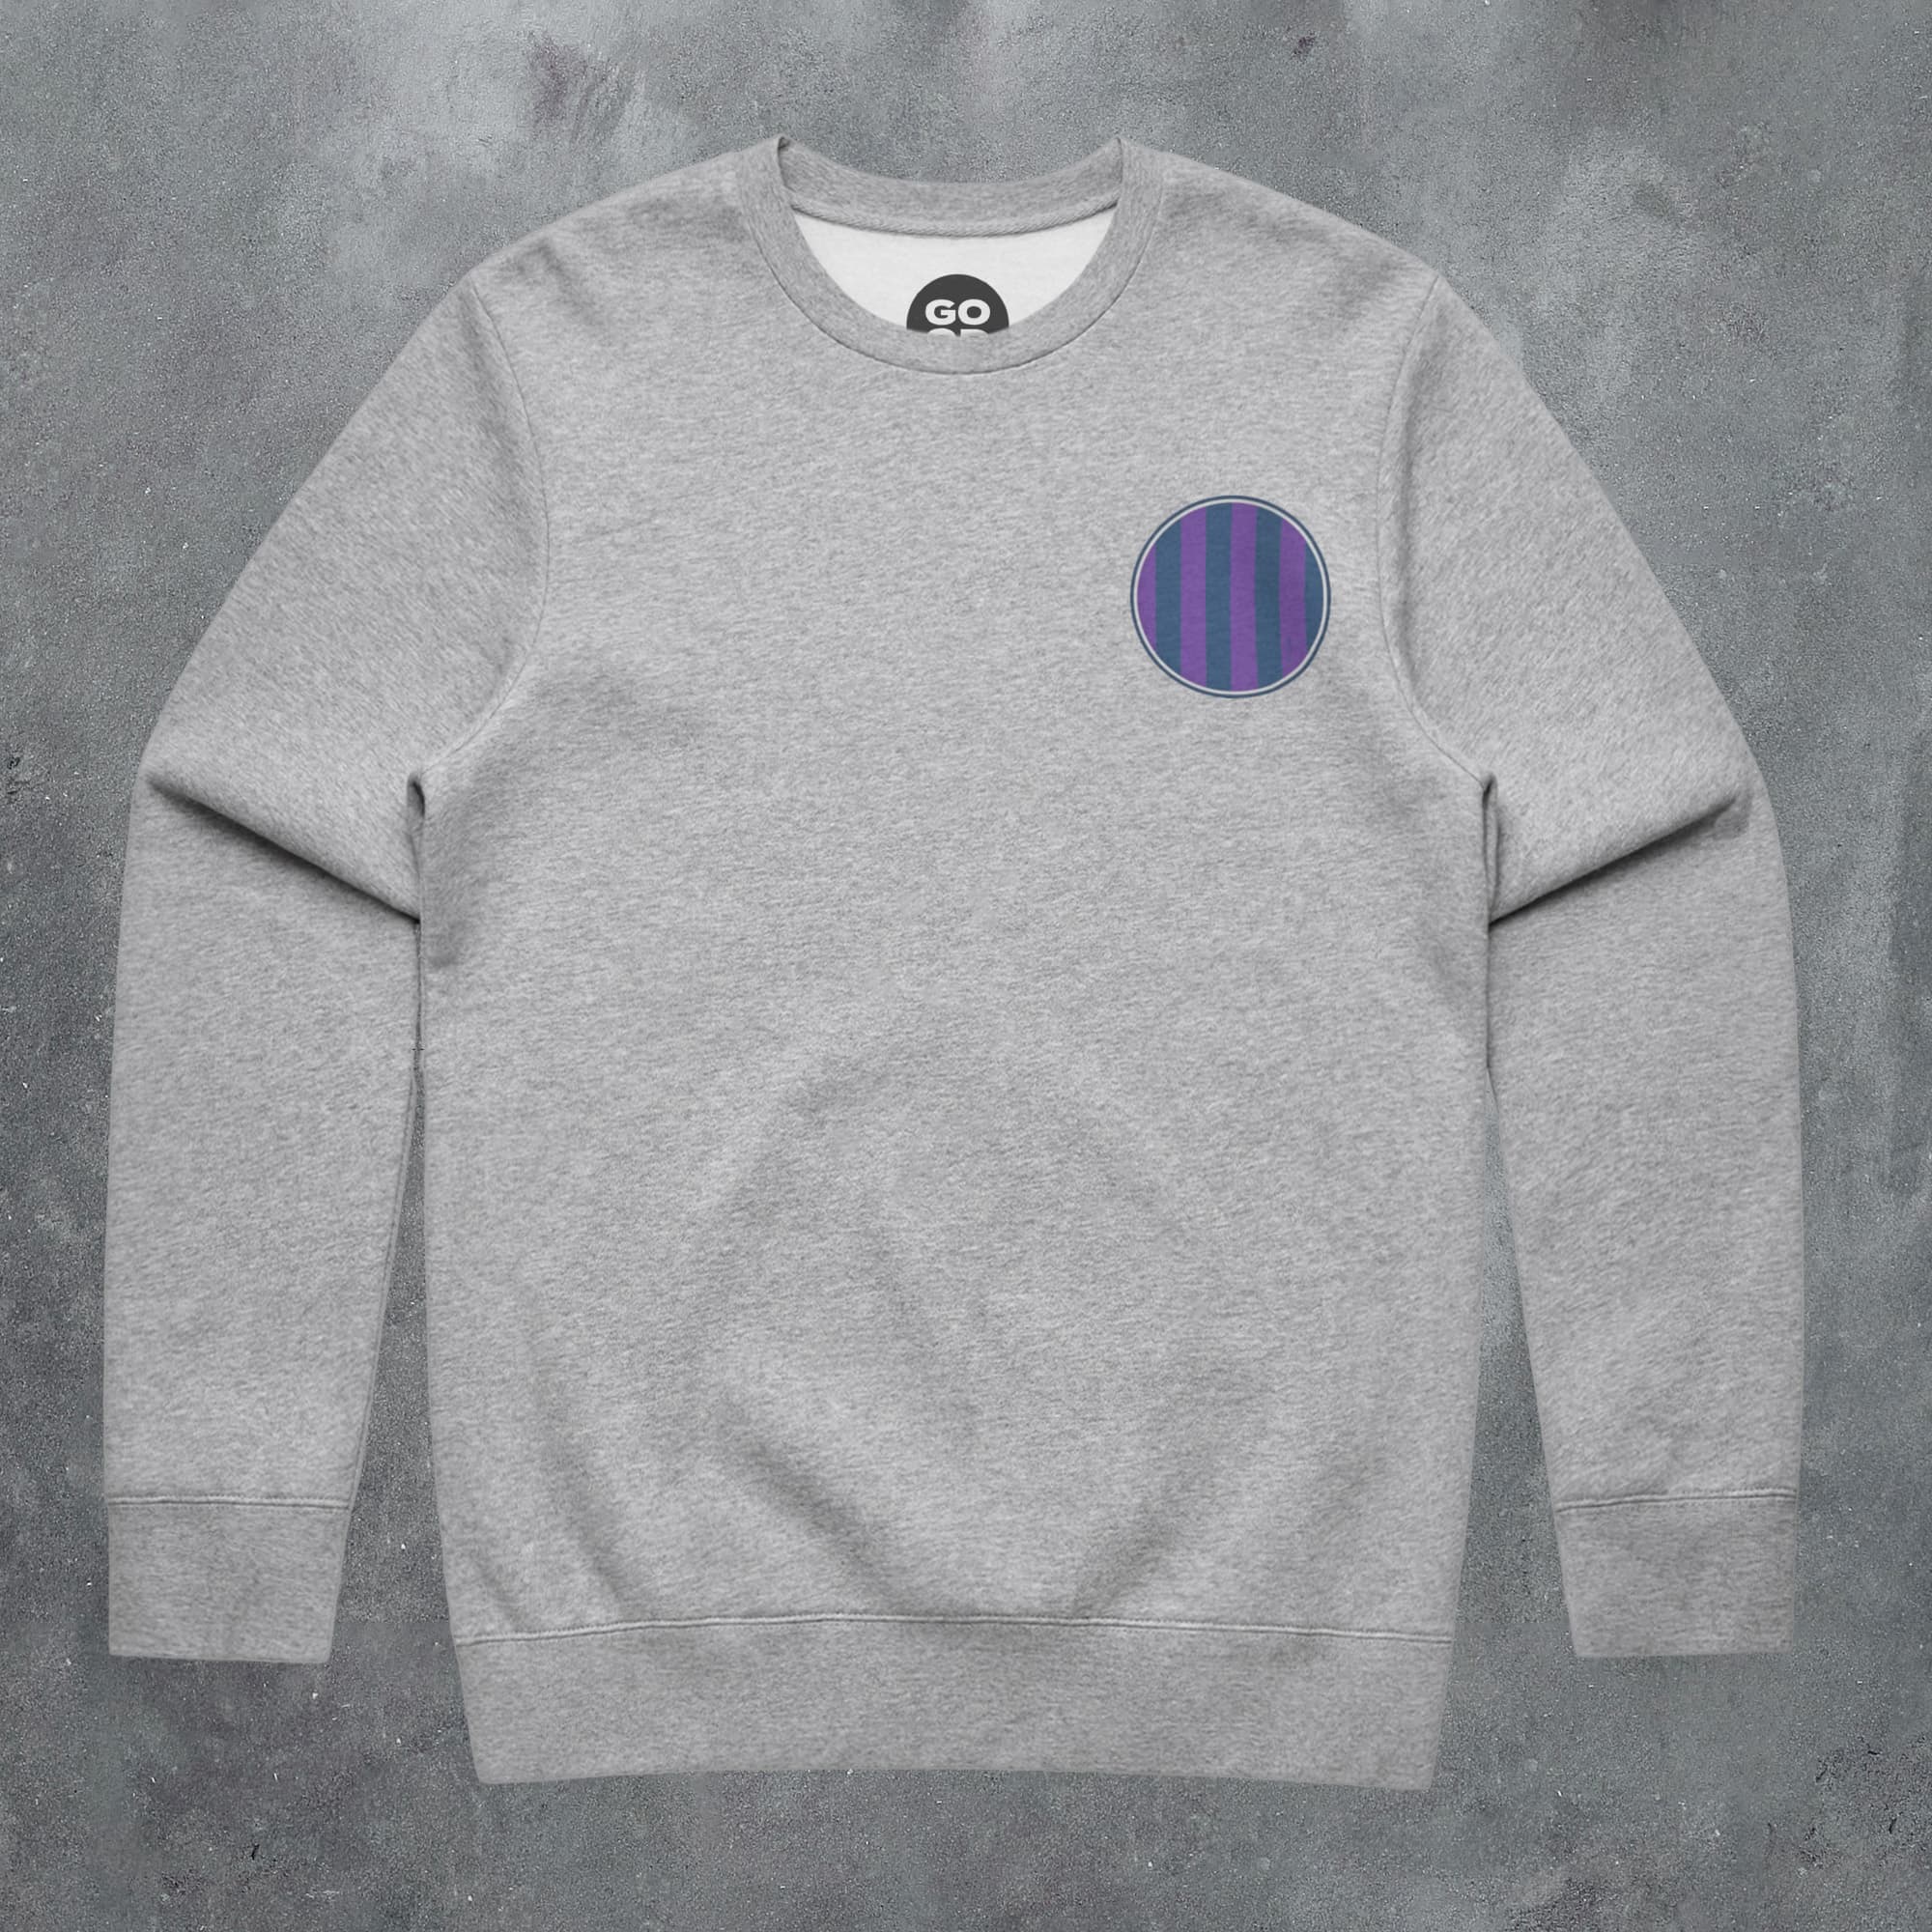 a grey sweatshirt with a purple circle on the front